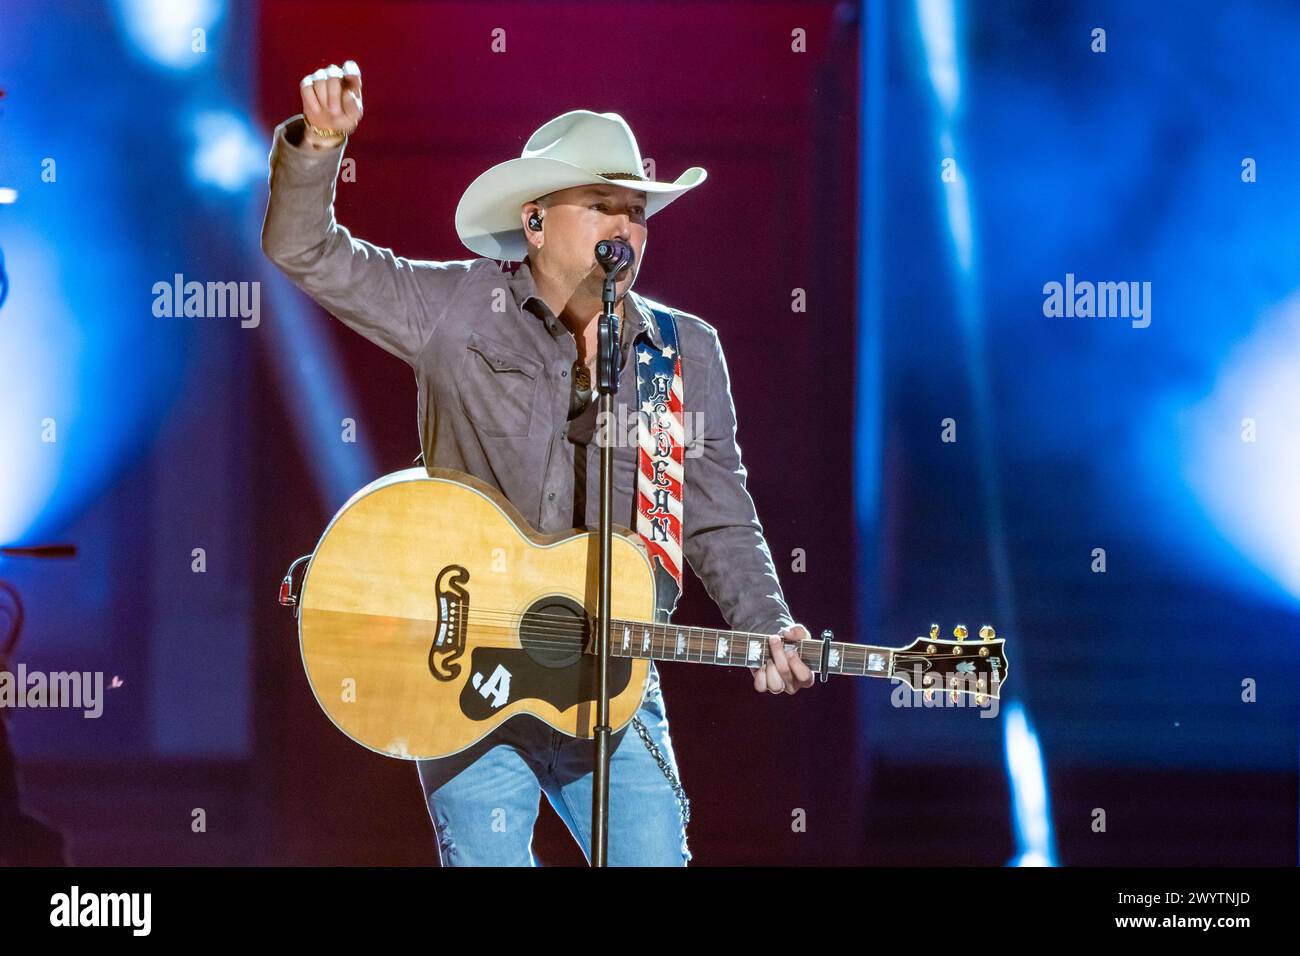 AUSTIN, TEXAS - APRIL 07: In this image released on April 07, 2024, Jason Aldean performs on the 2024 CMT Music Awards stage on April 3, 2024, at the University of Texas at Austin in Austin, Texas.  (Photo by Amy Price/ImageSPACE) Stock Photo